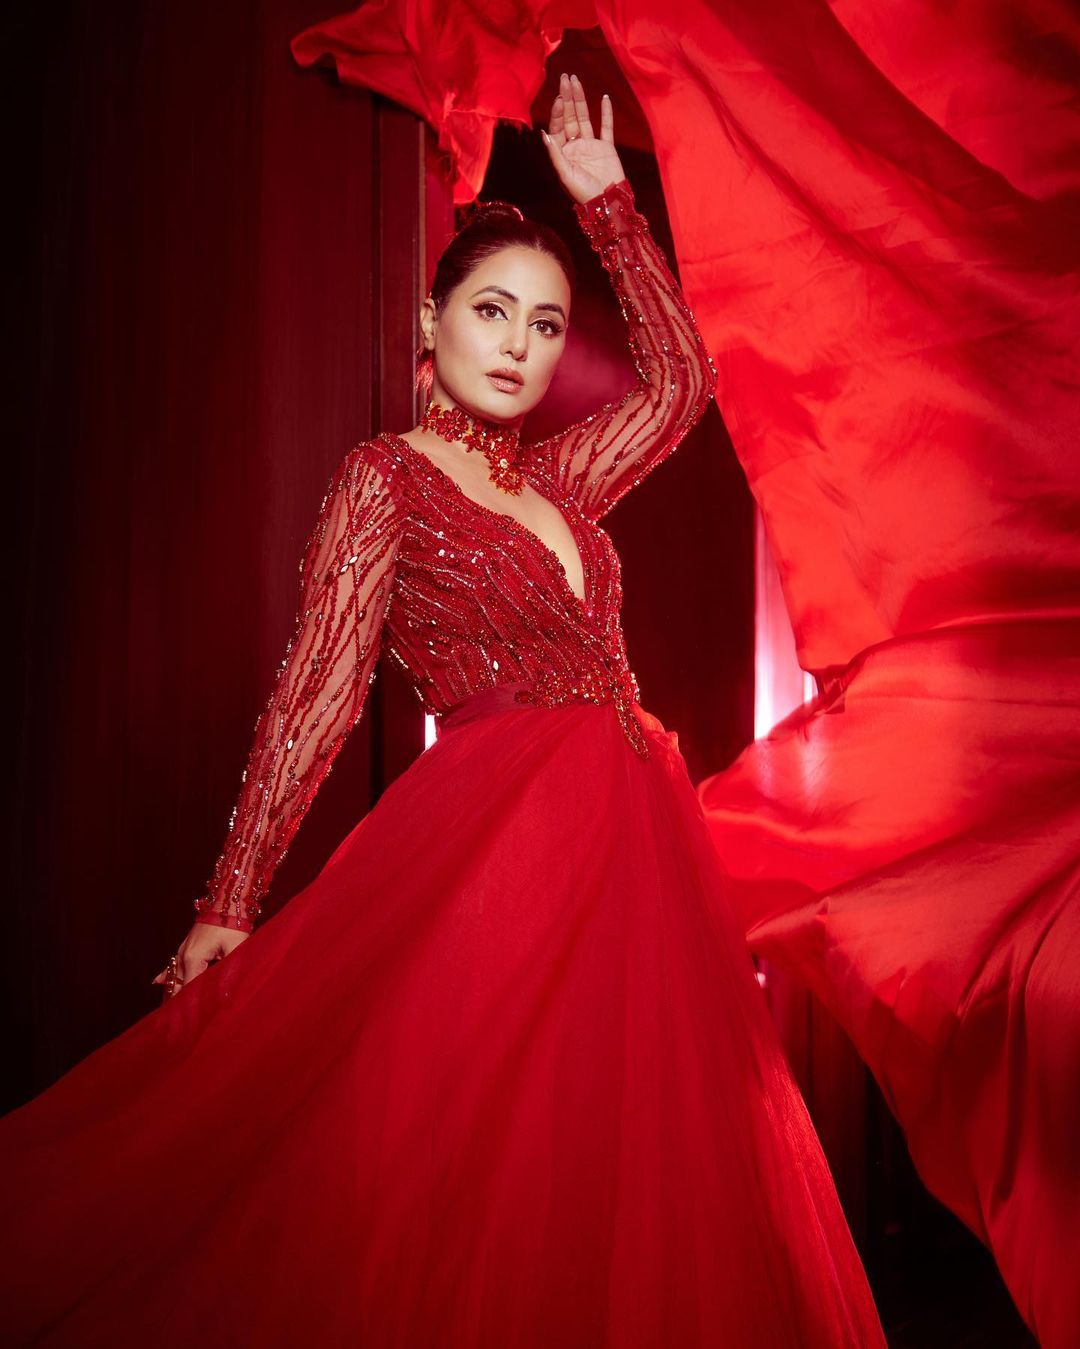 Looking ravishing in a flowy red gown. | Once You See This Bollywood  Actress's Amazing Style, It's Hard to Forget Her | POPSUGAR Fashion UK  Photo 13